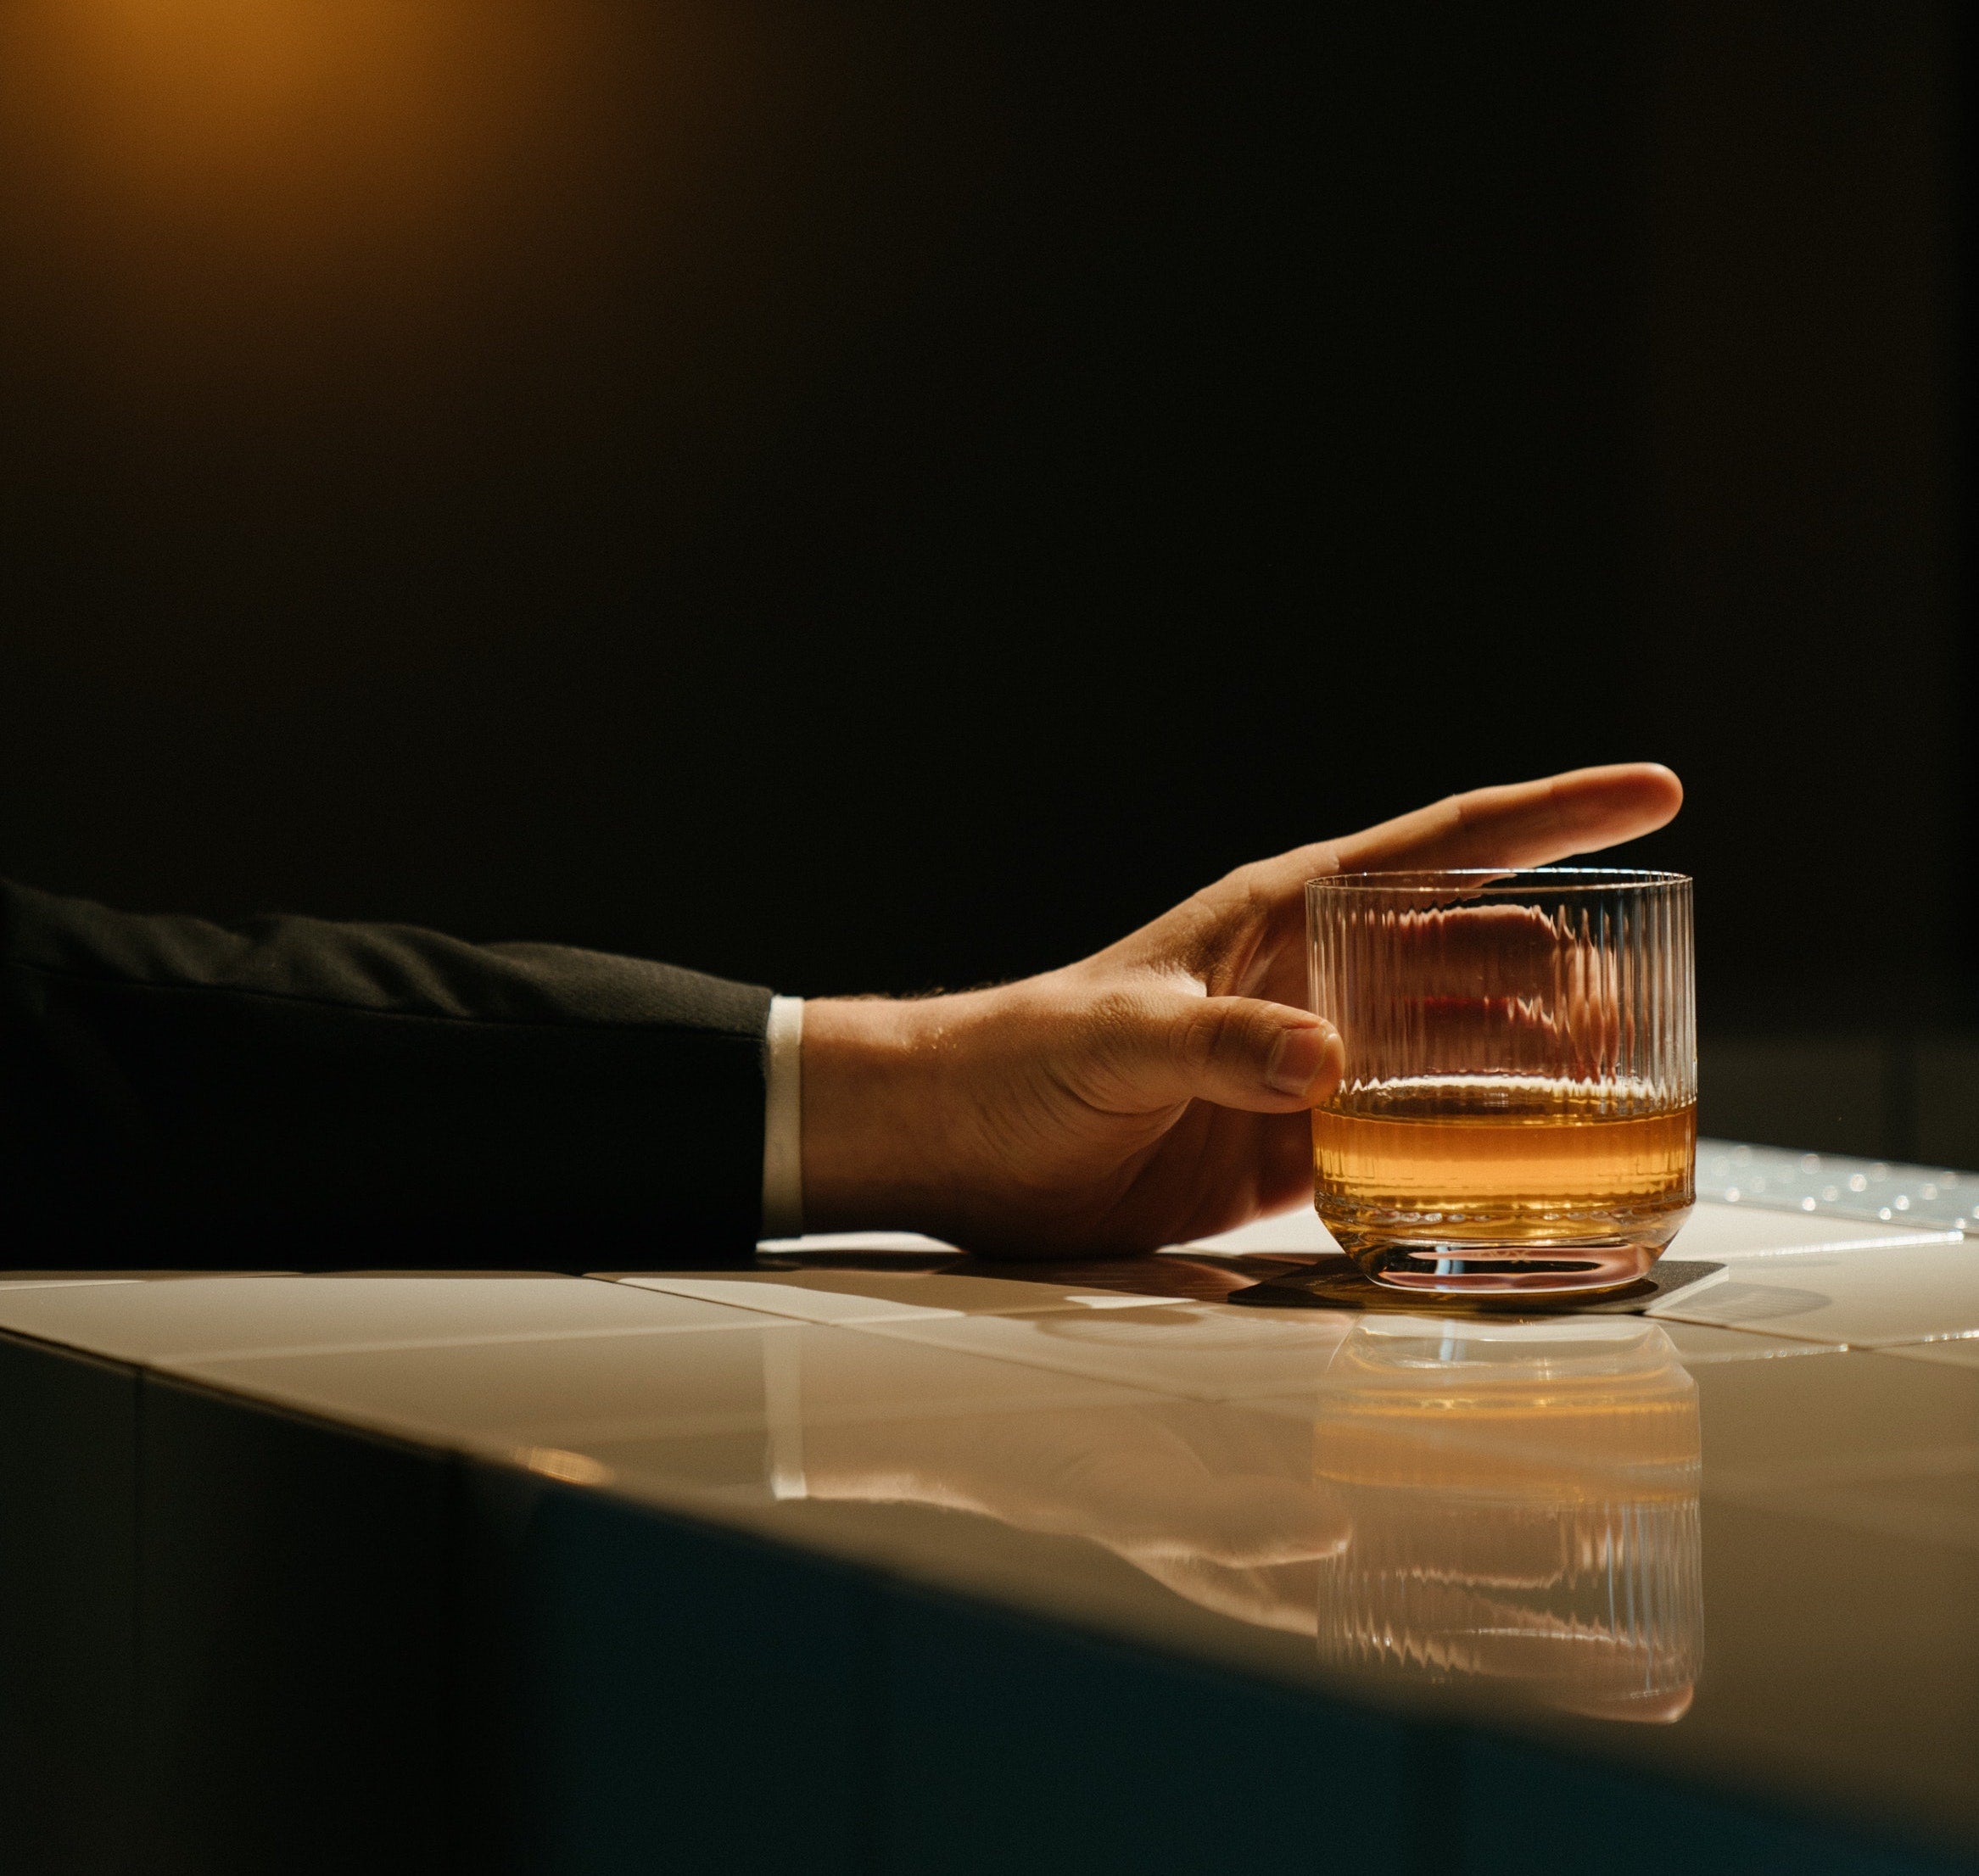 Discovering Different Ways to Enjoy Whisky